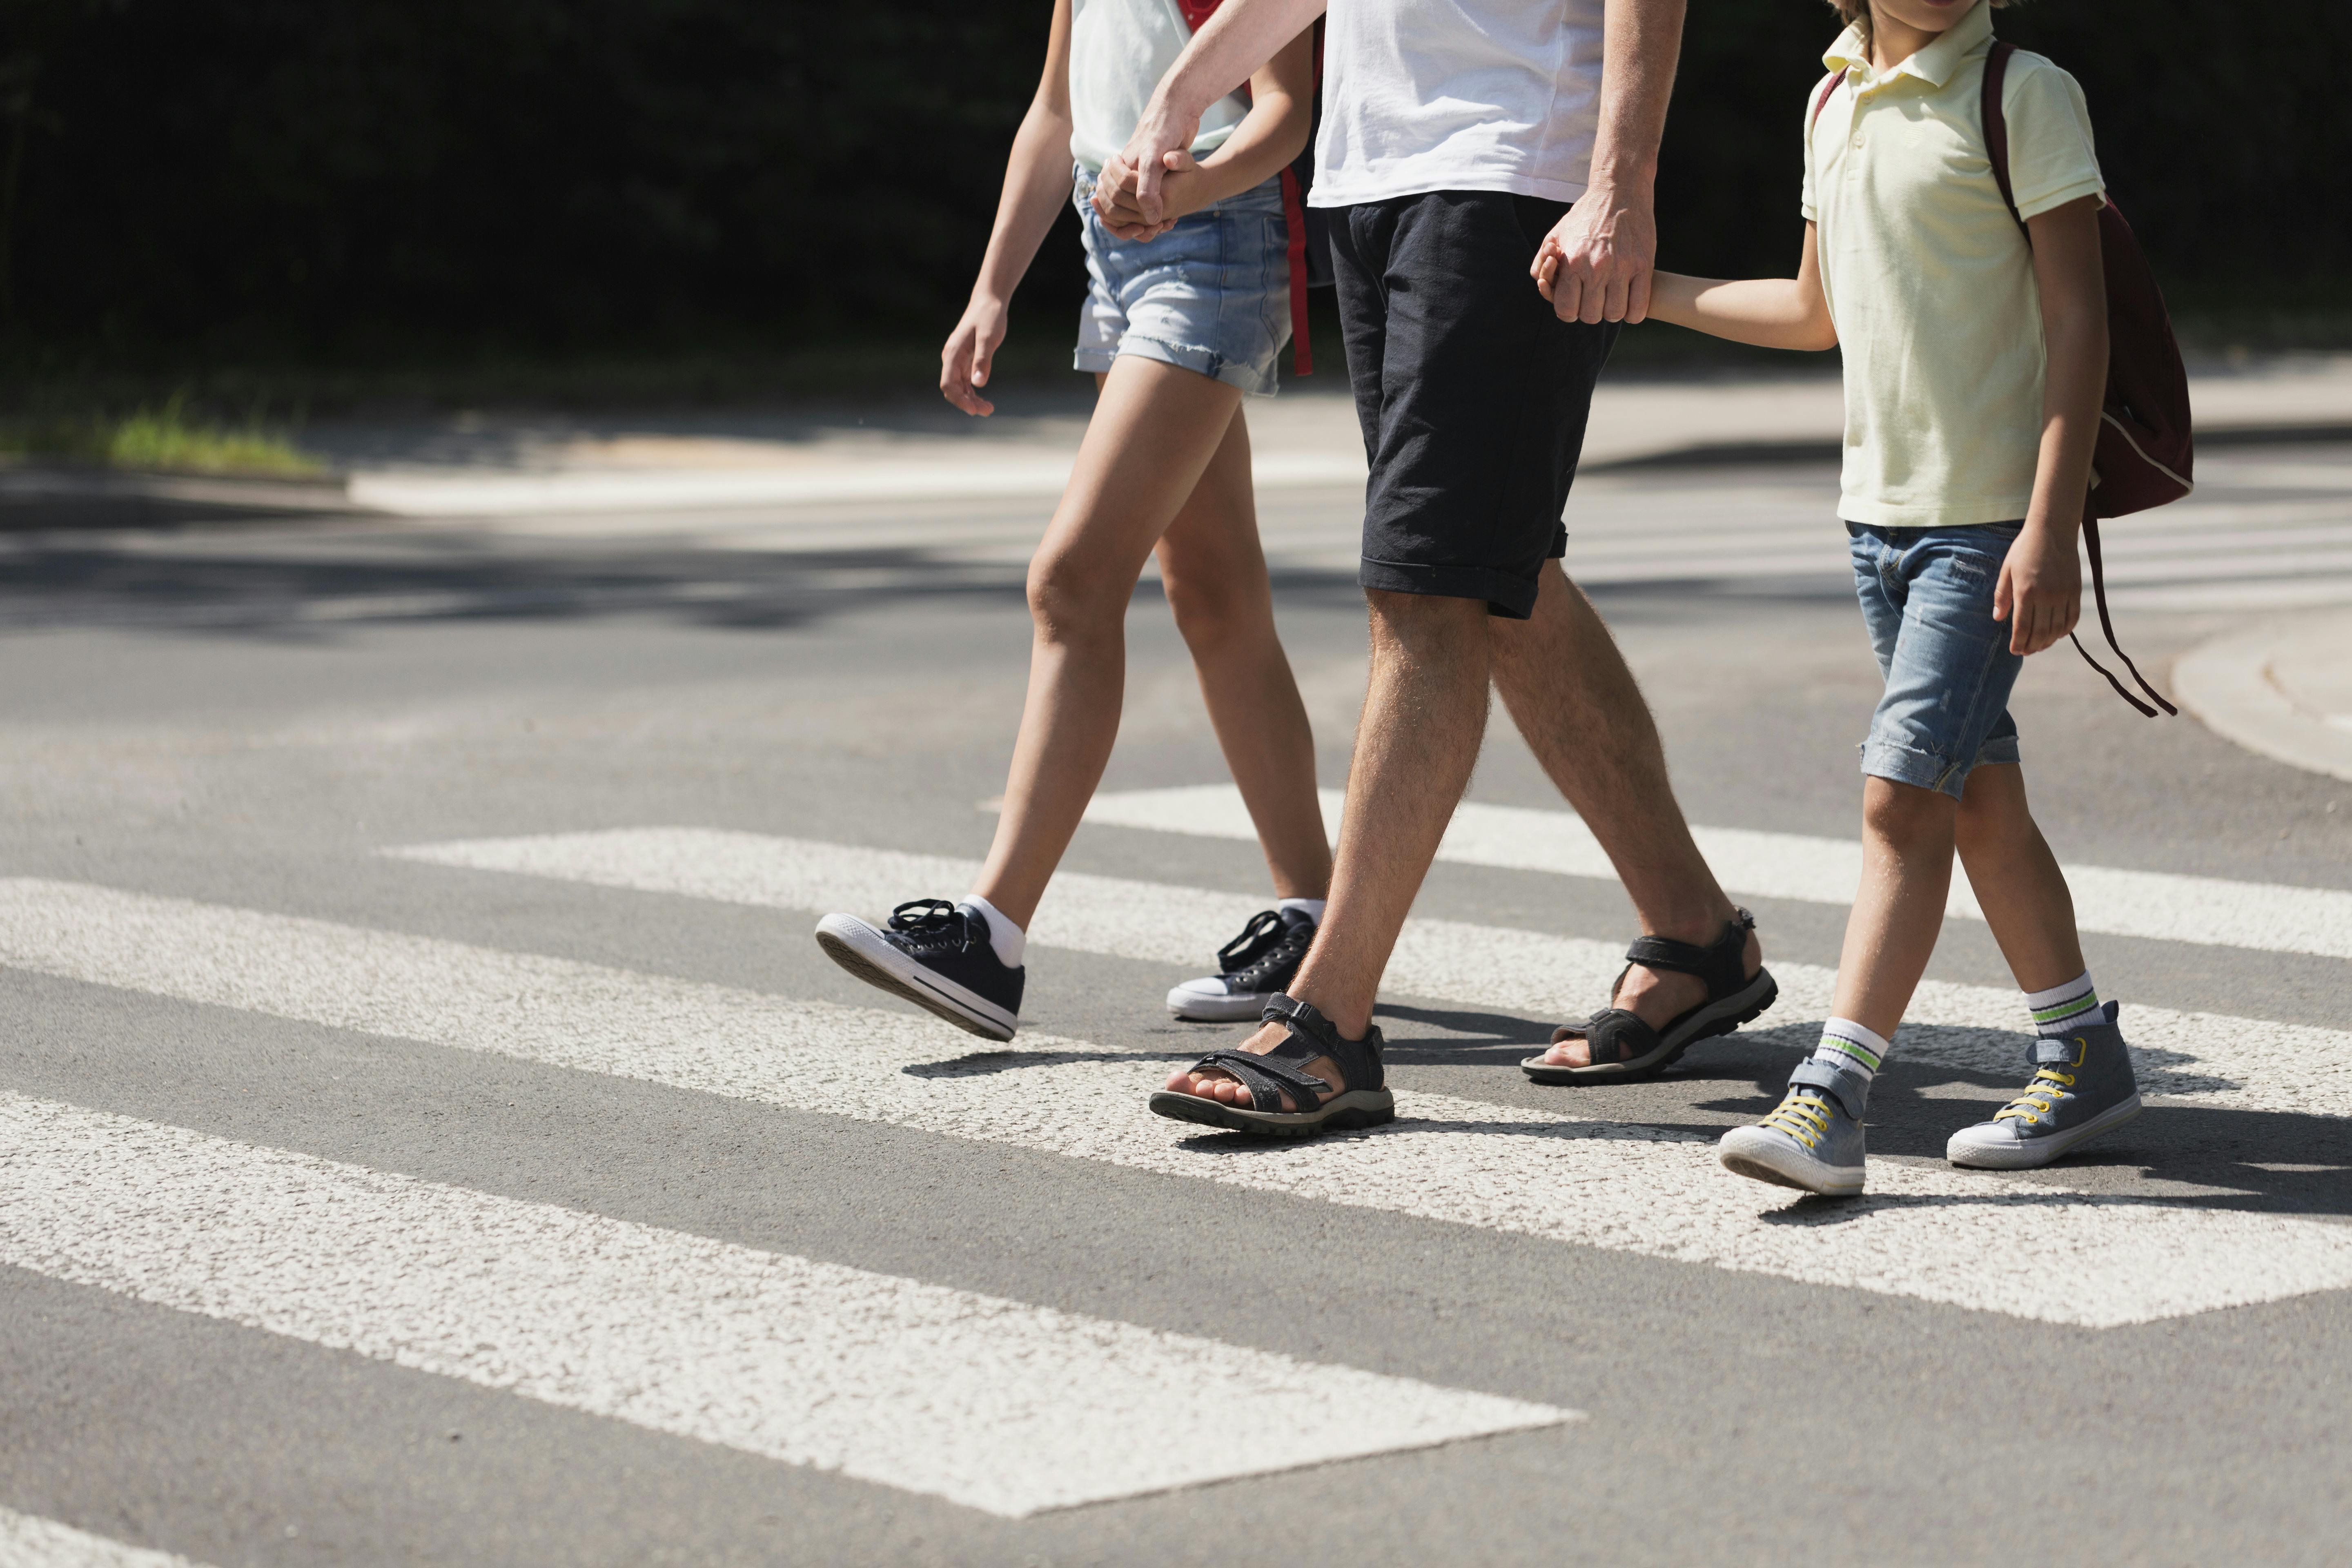 Father holding hands with his kids while on pedestrian crossing